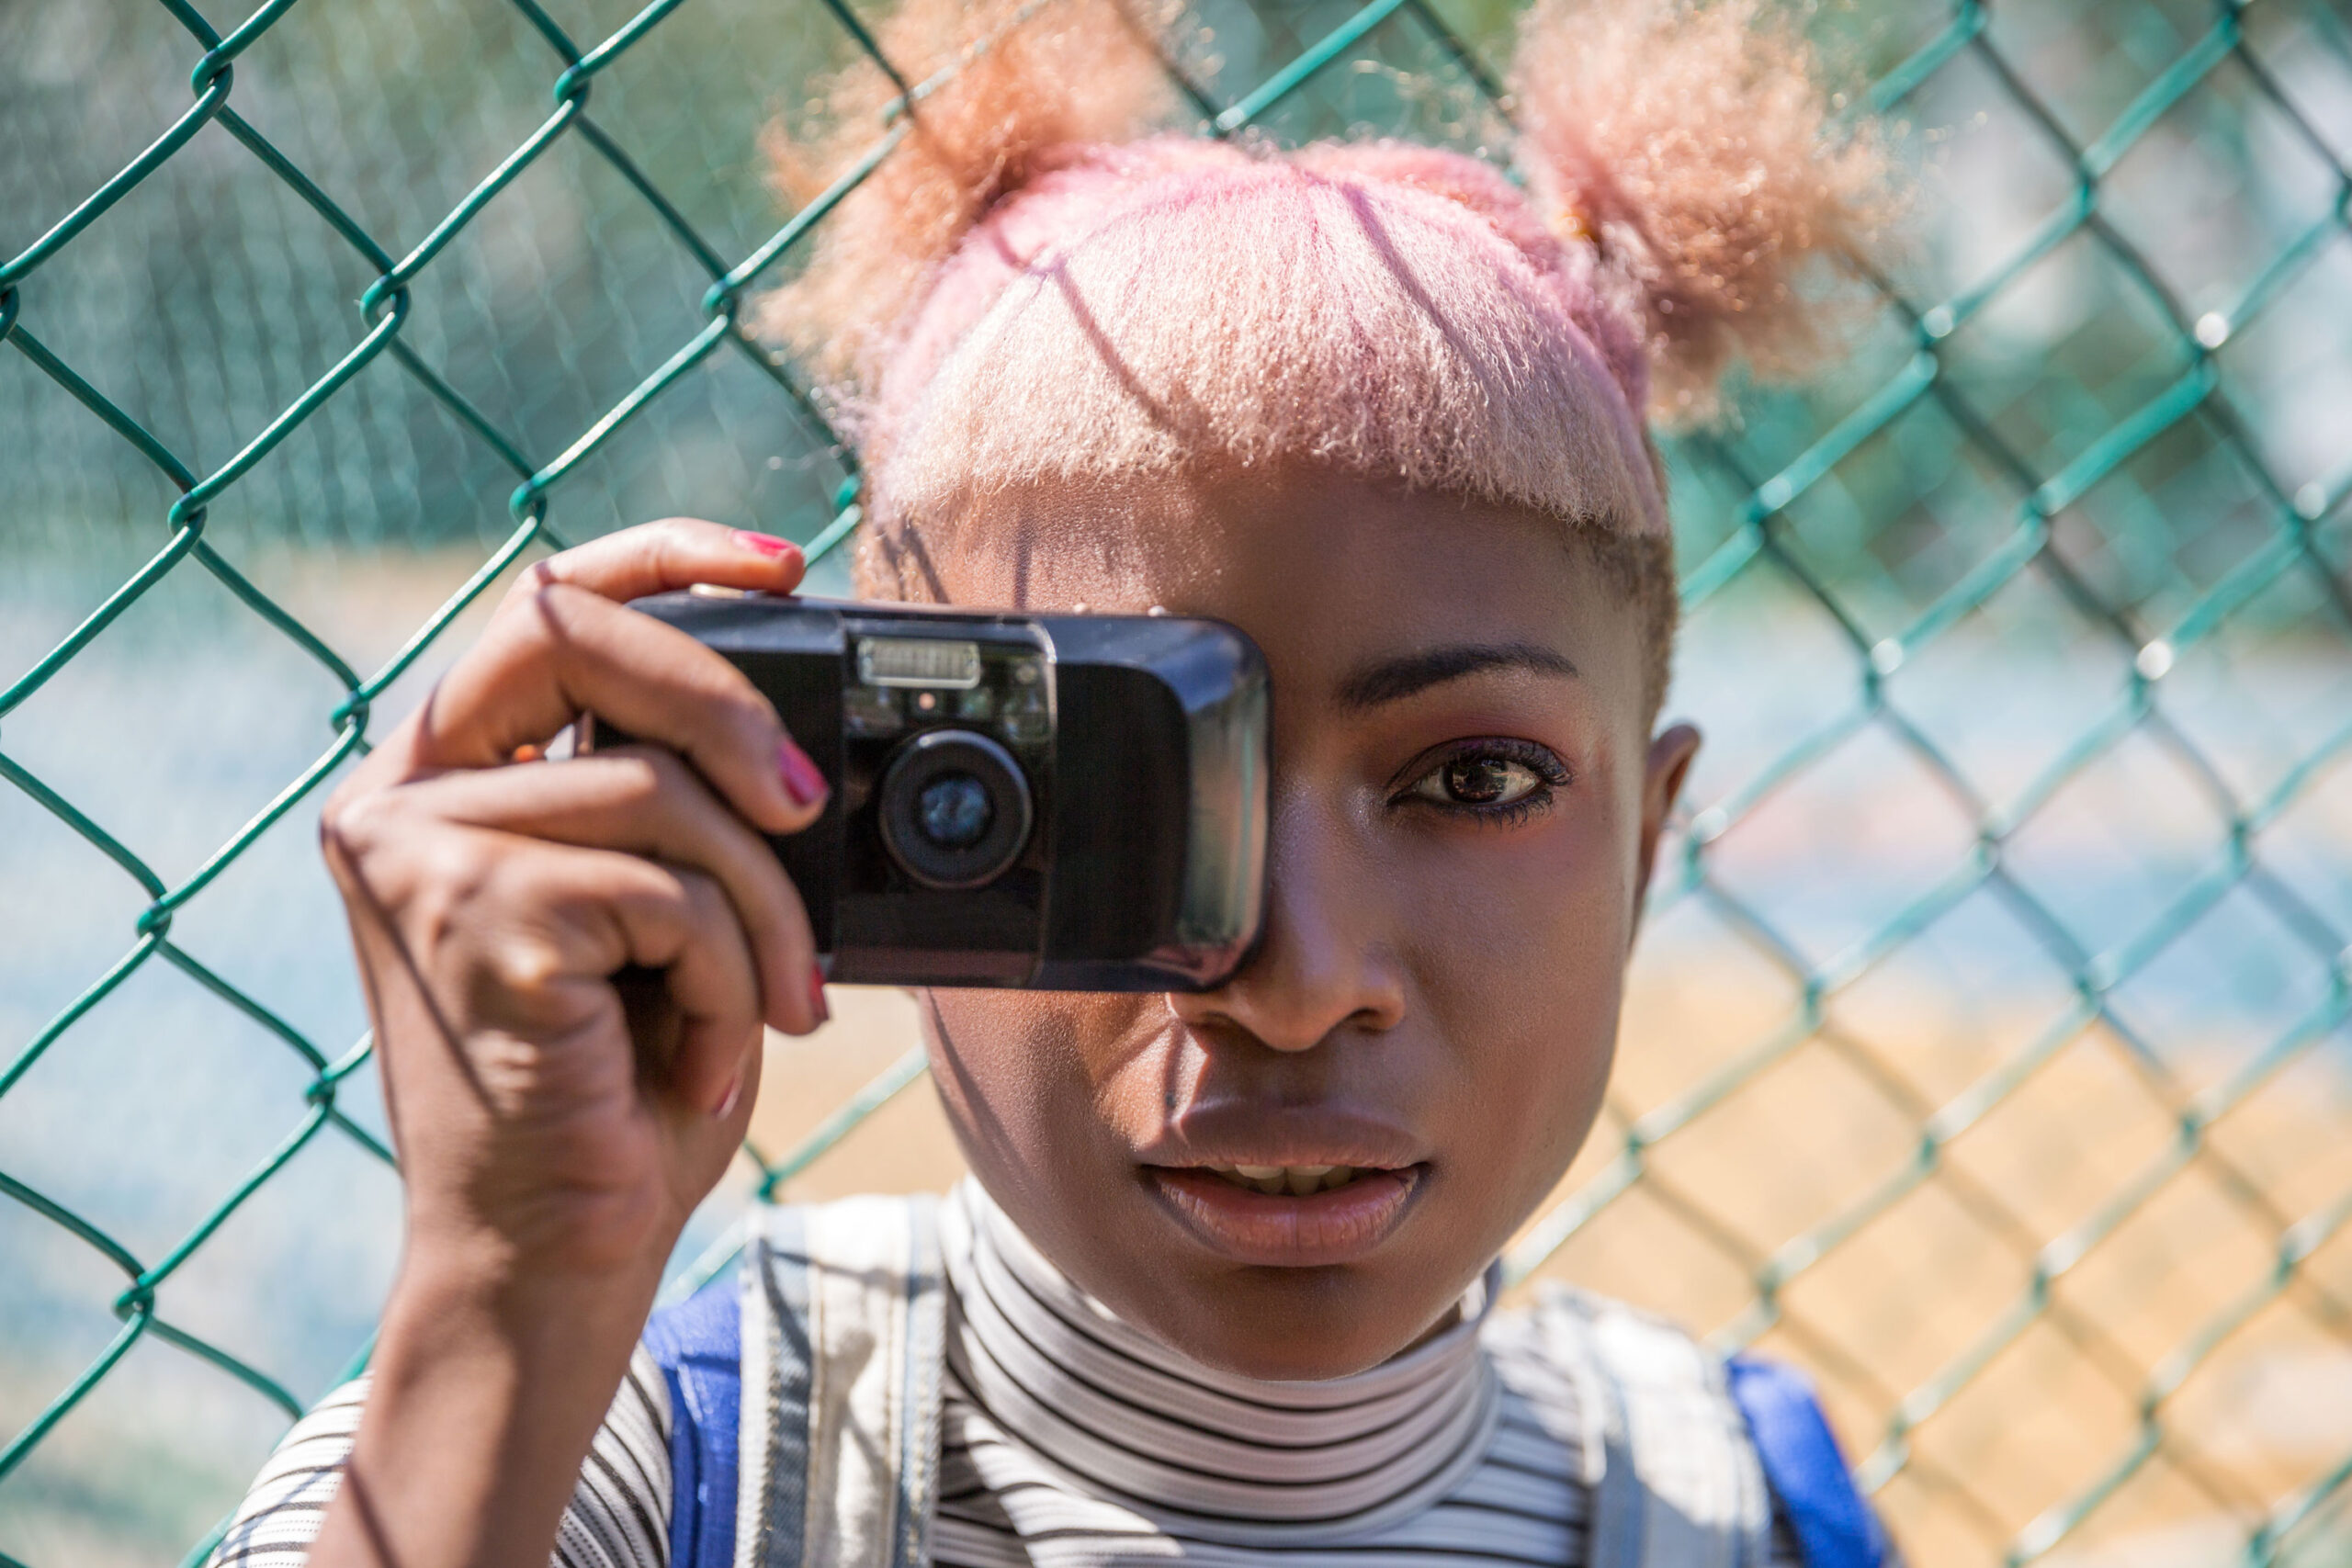 Creative black girl taking photo of viewer with film camera near fence. Her hair is pink and she has a funky haircut